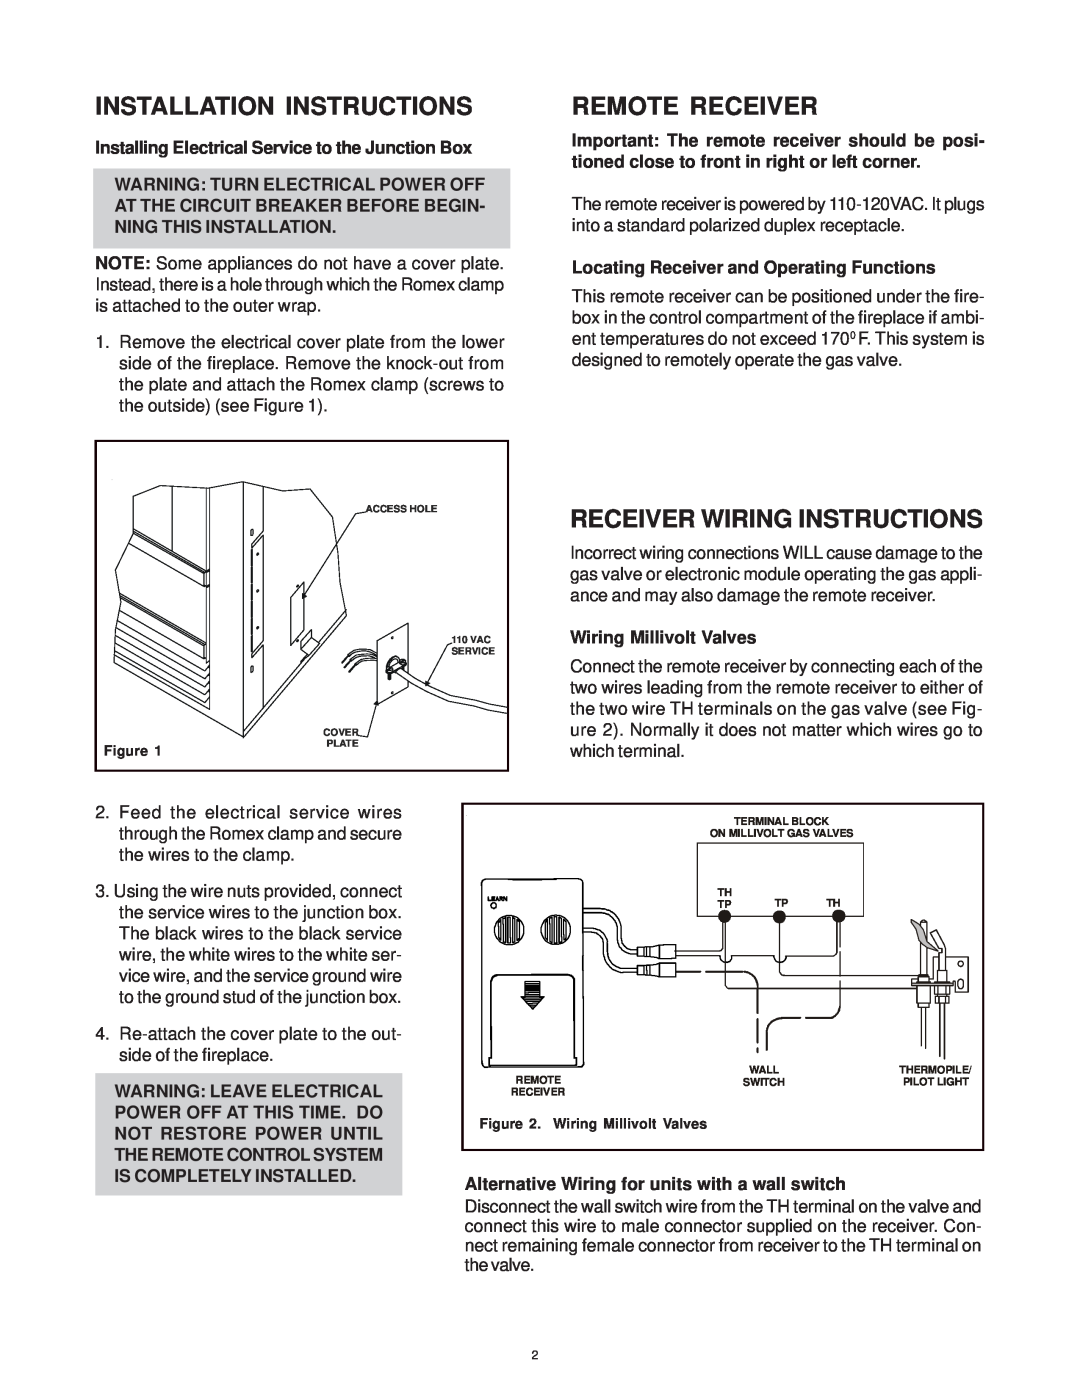 Hearth and Home Technologies SMART-STAT-II Installation Instructions, Remote Receiver, Receiver Wiring Instructions 